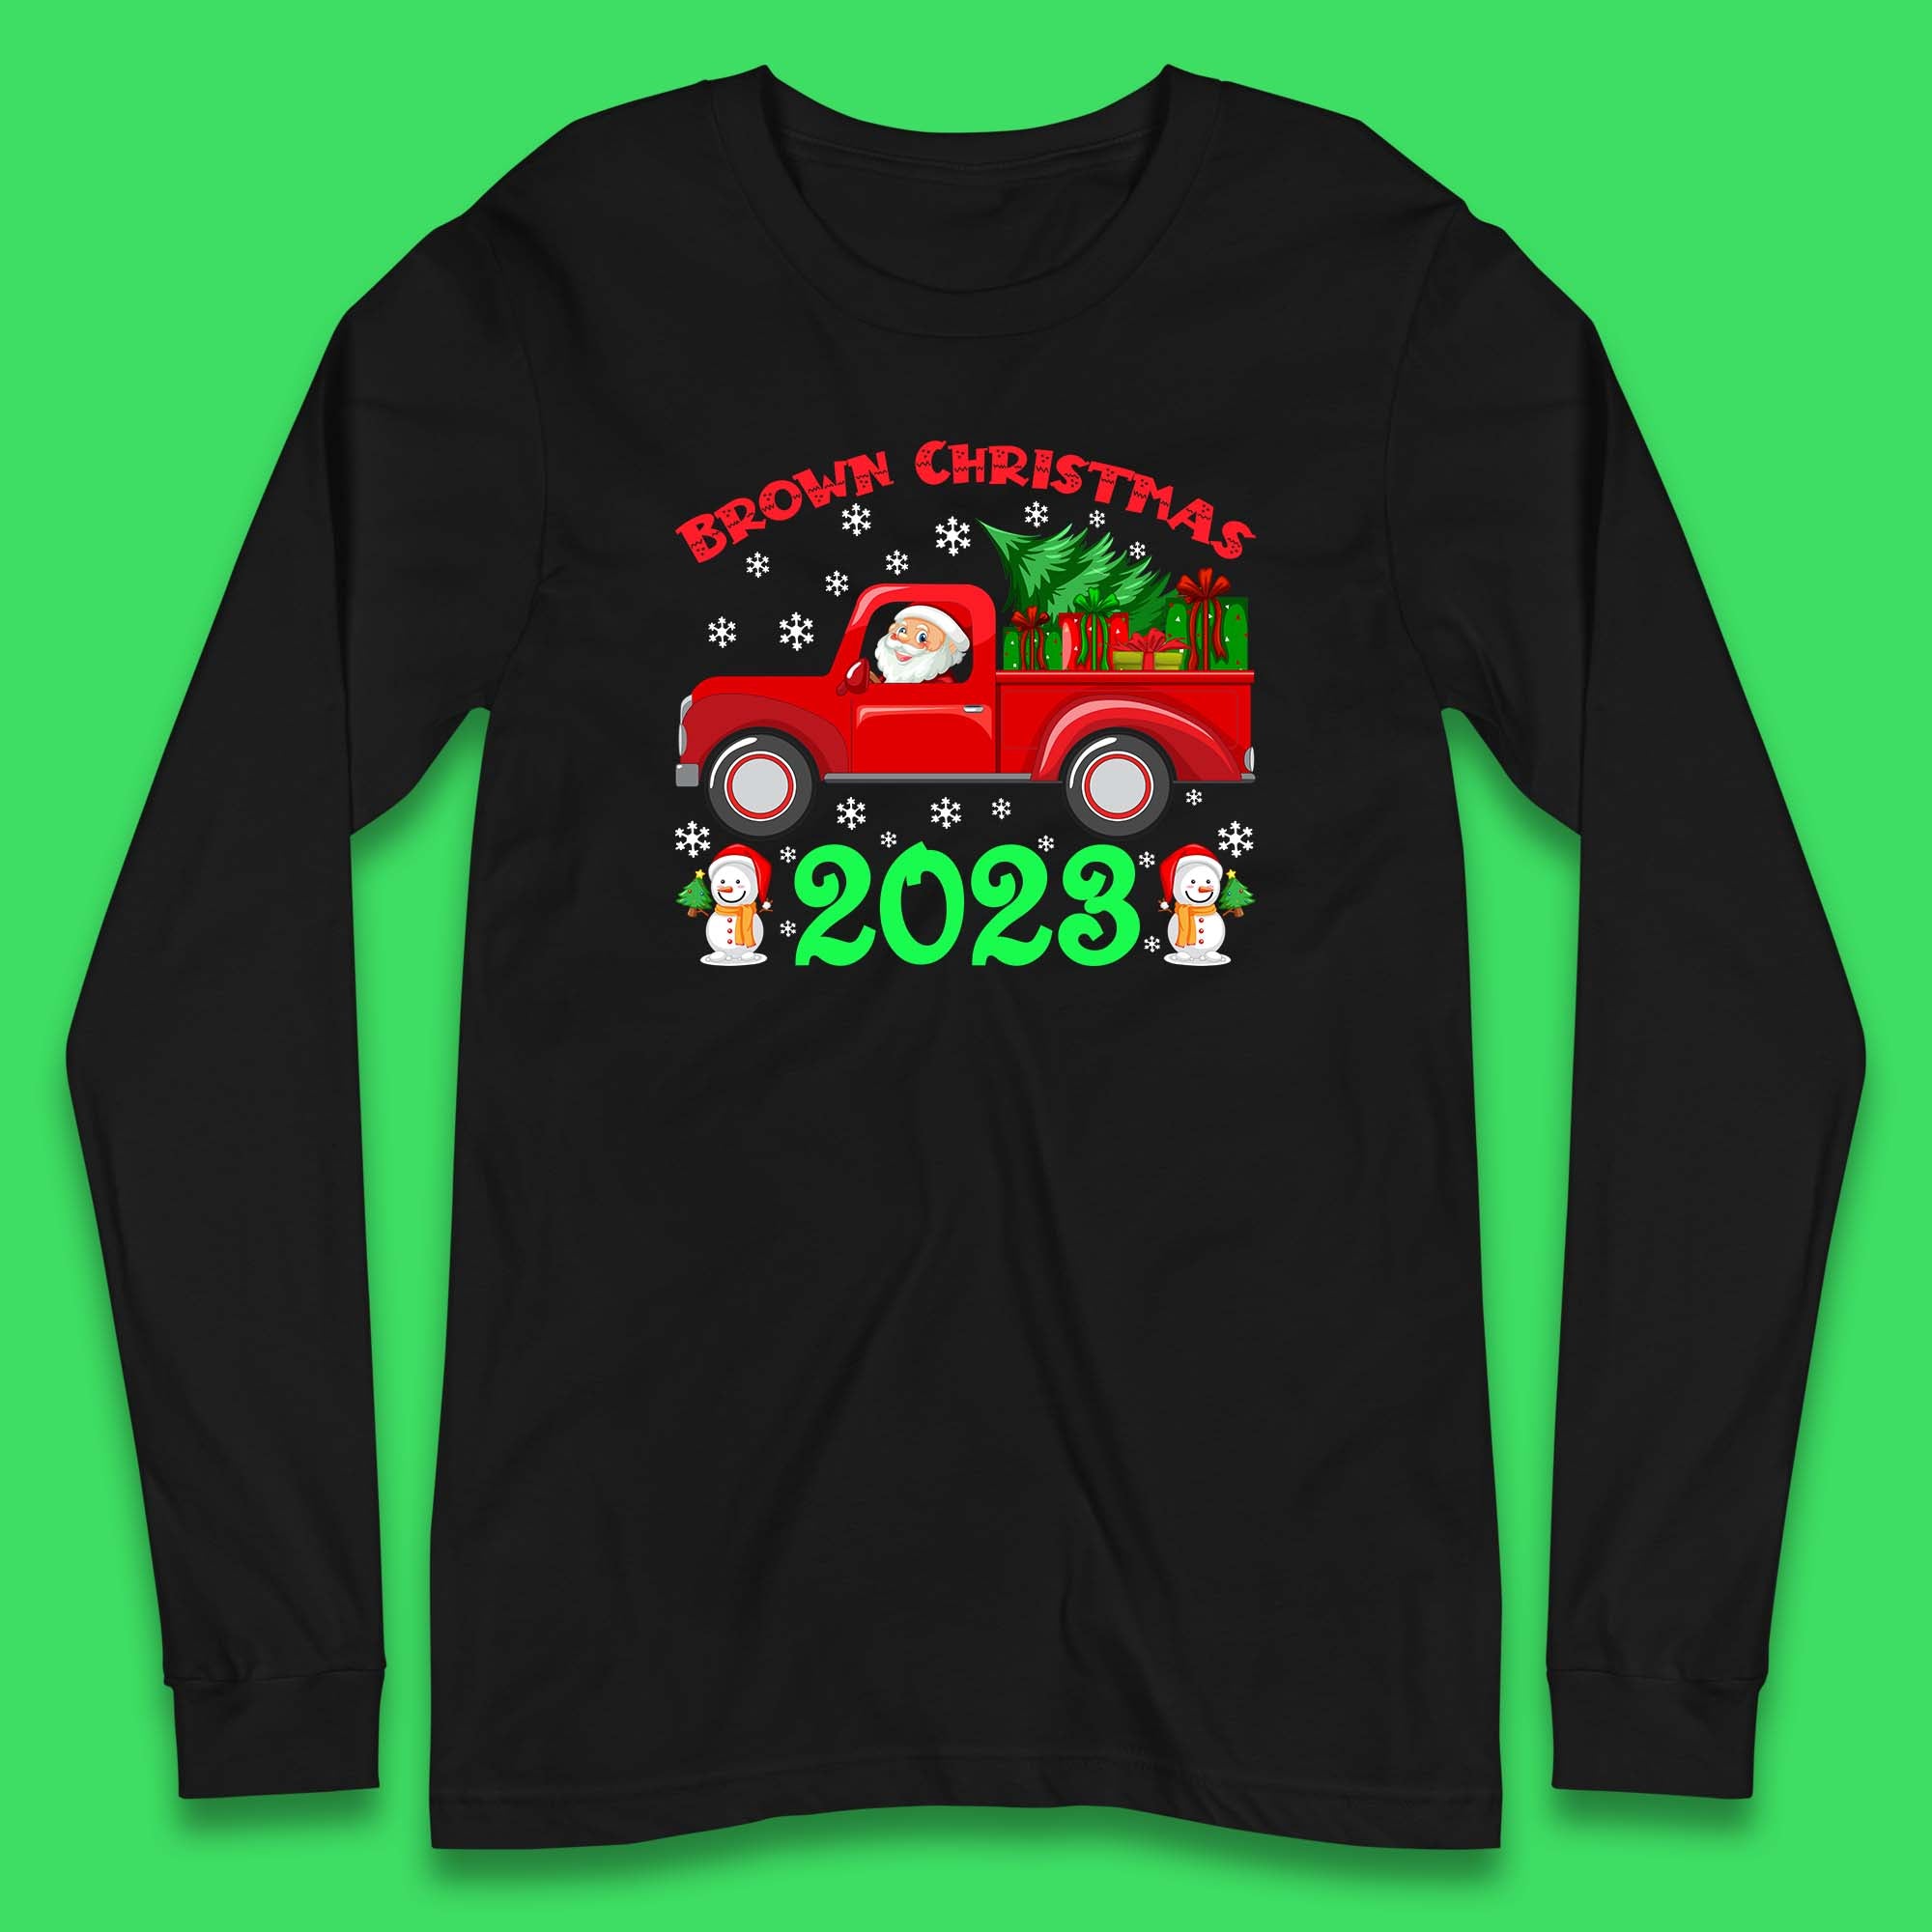 Brown Christmas 2023 Santa Claus Driving Truck With Christmas Tree To Delivery Christmas Gifts Xmas Long Sleeve T Shirt